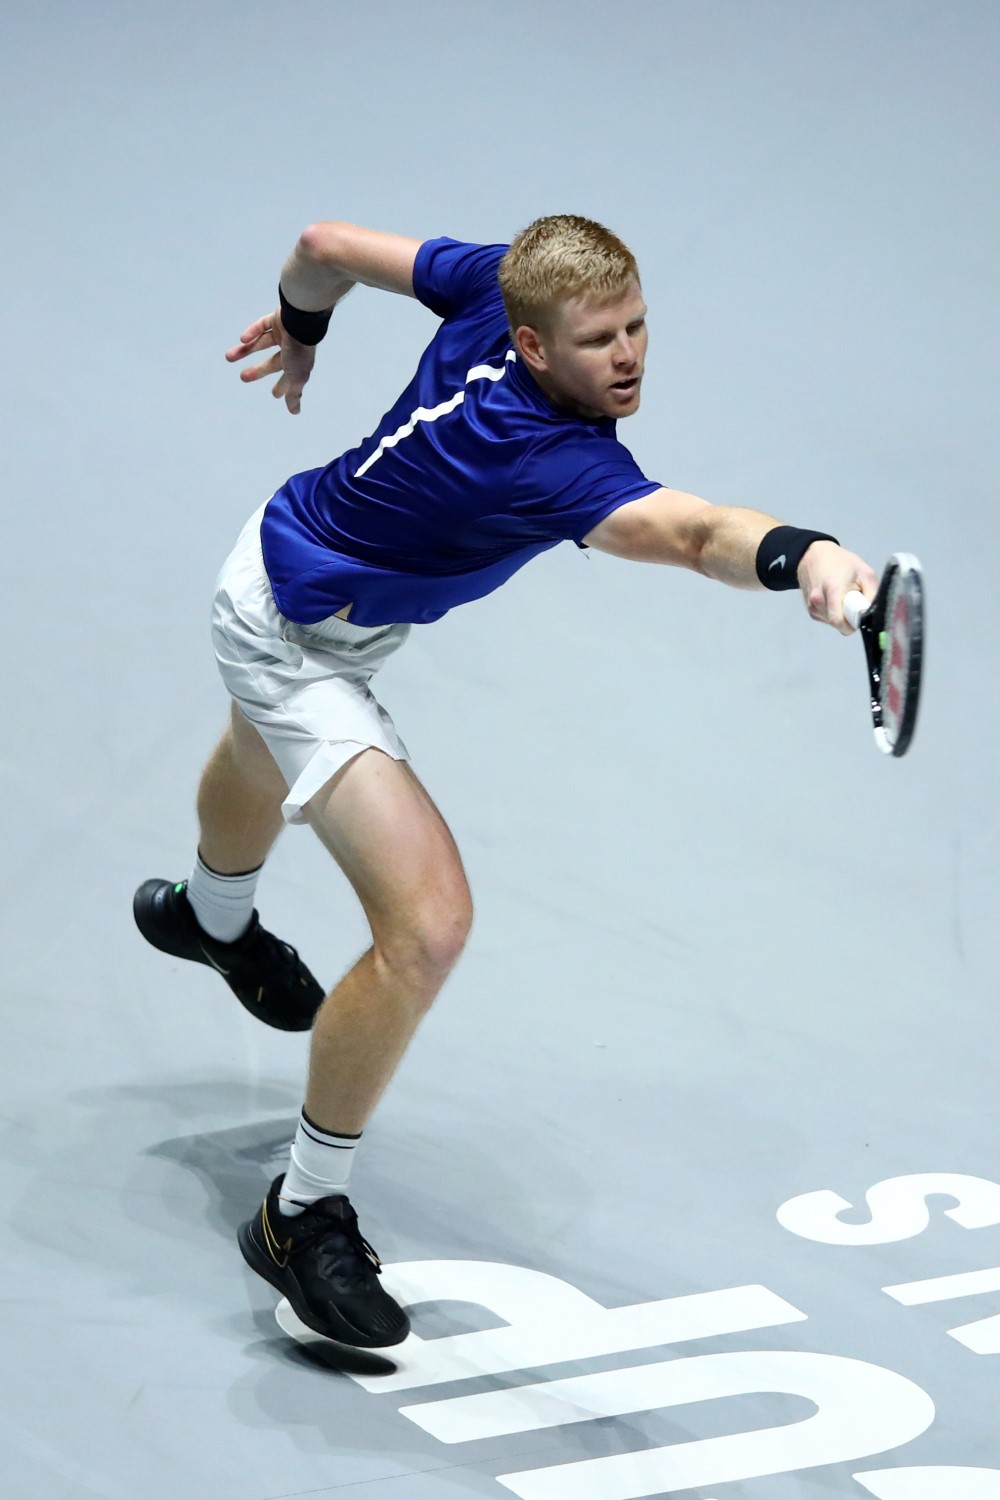 Kyle Edmund on court reaching out to hit a tennis ball with his racket